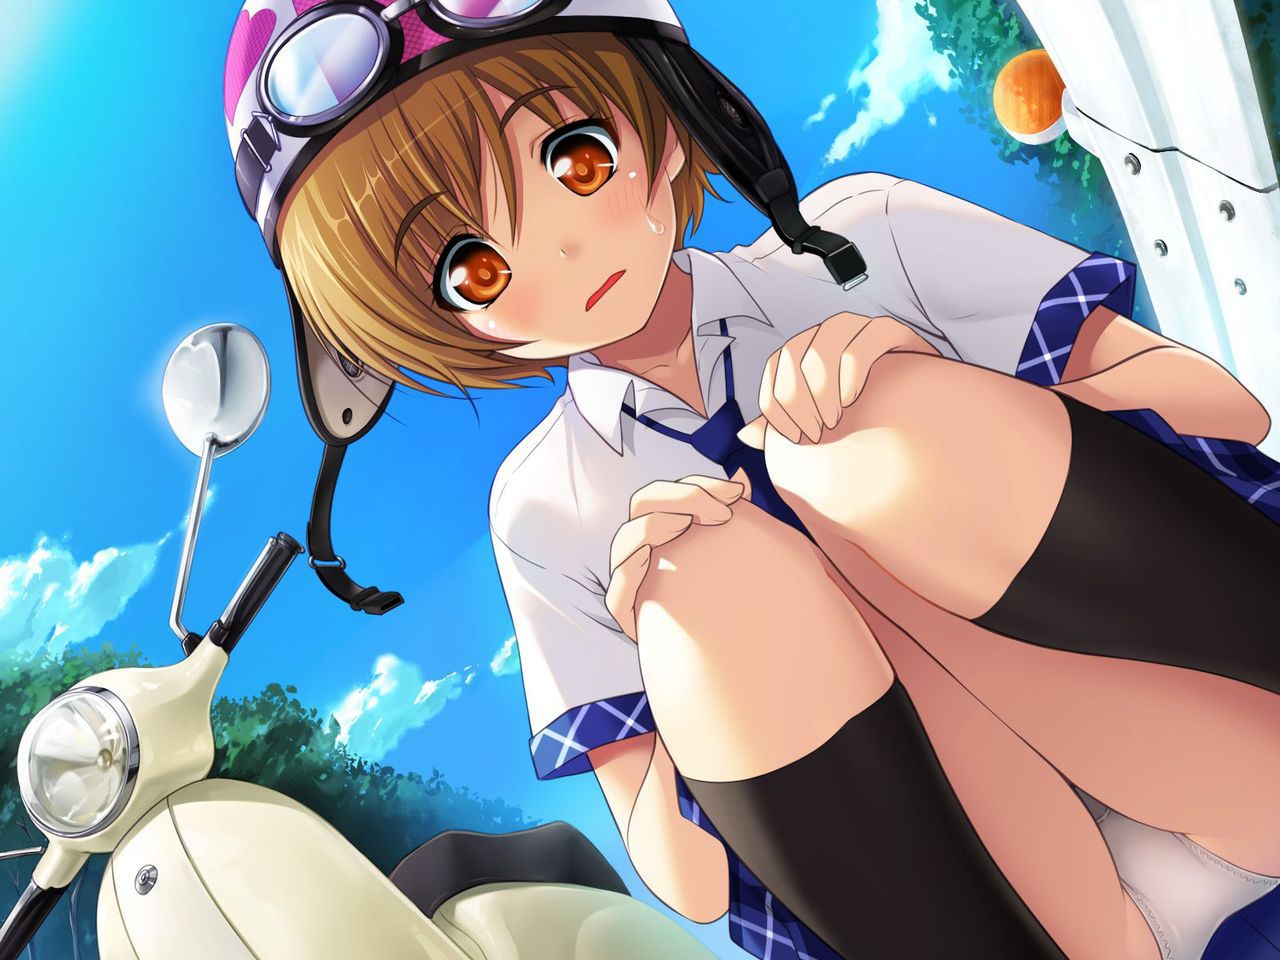 There is also an image of a beautiful girl uniform I want to try to socialize by all means 14